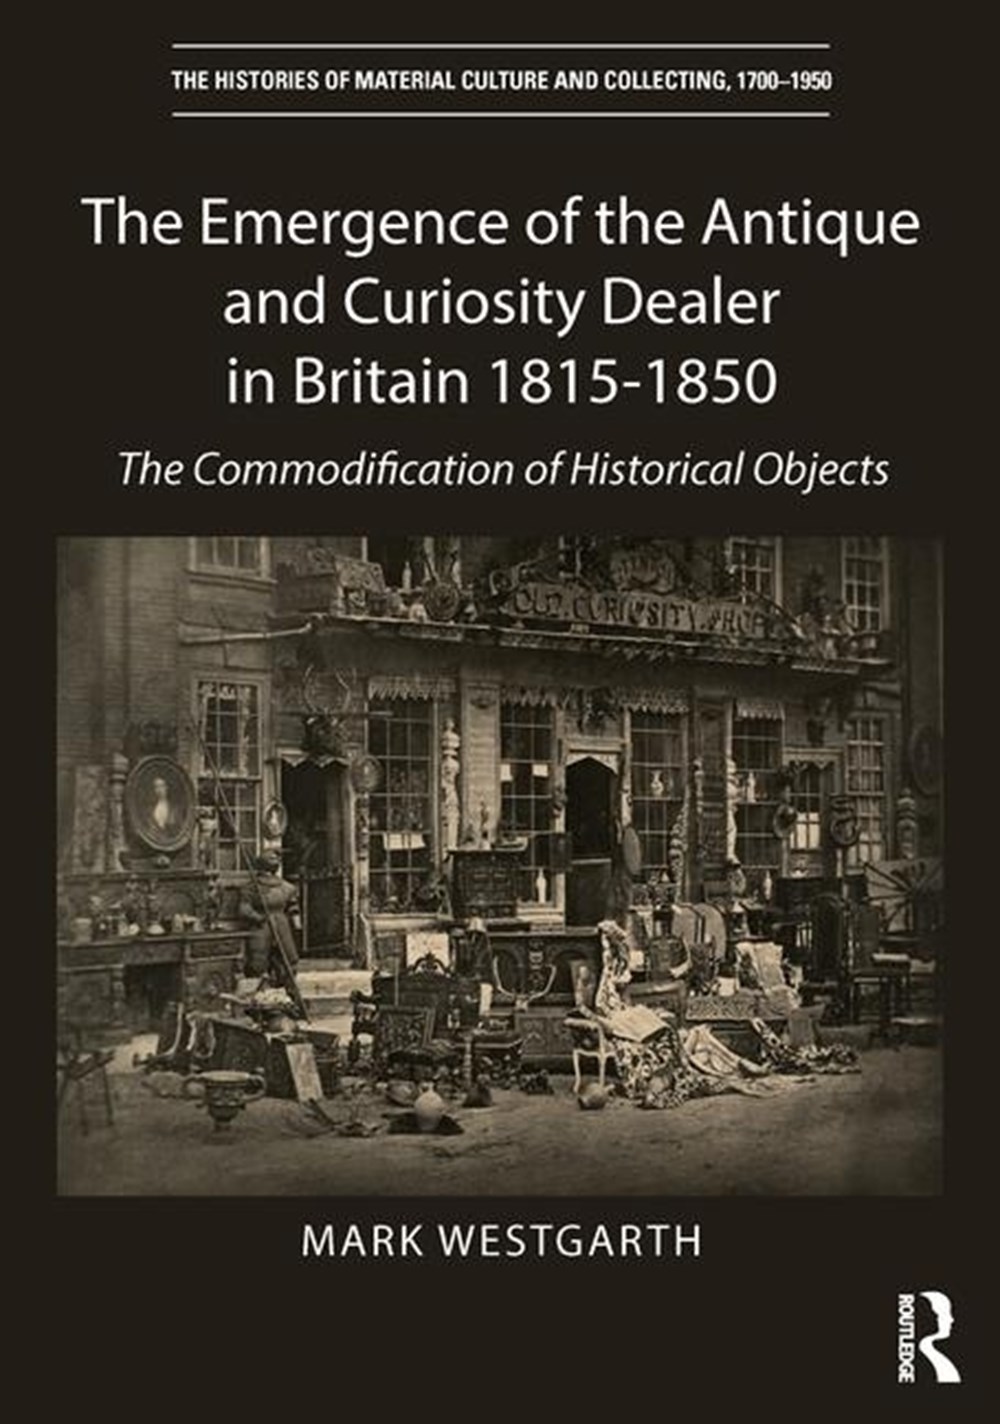 Emergence of the Antique and Curiosity Dealer in Britain 1815-1850 The Commodification of Historical